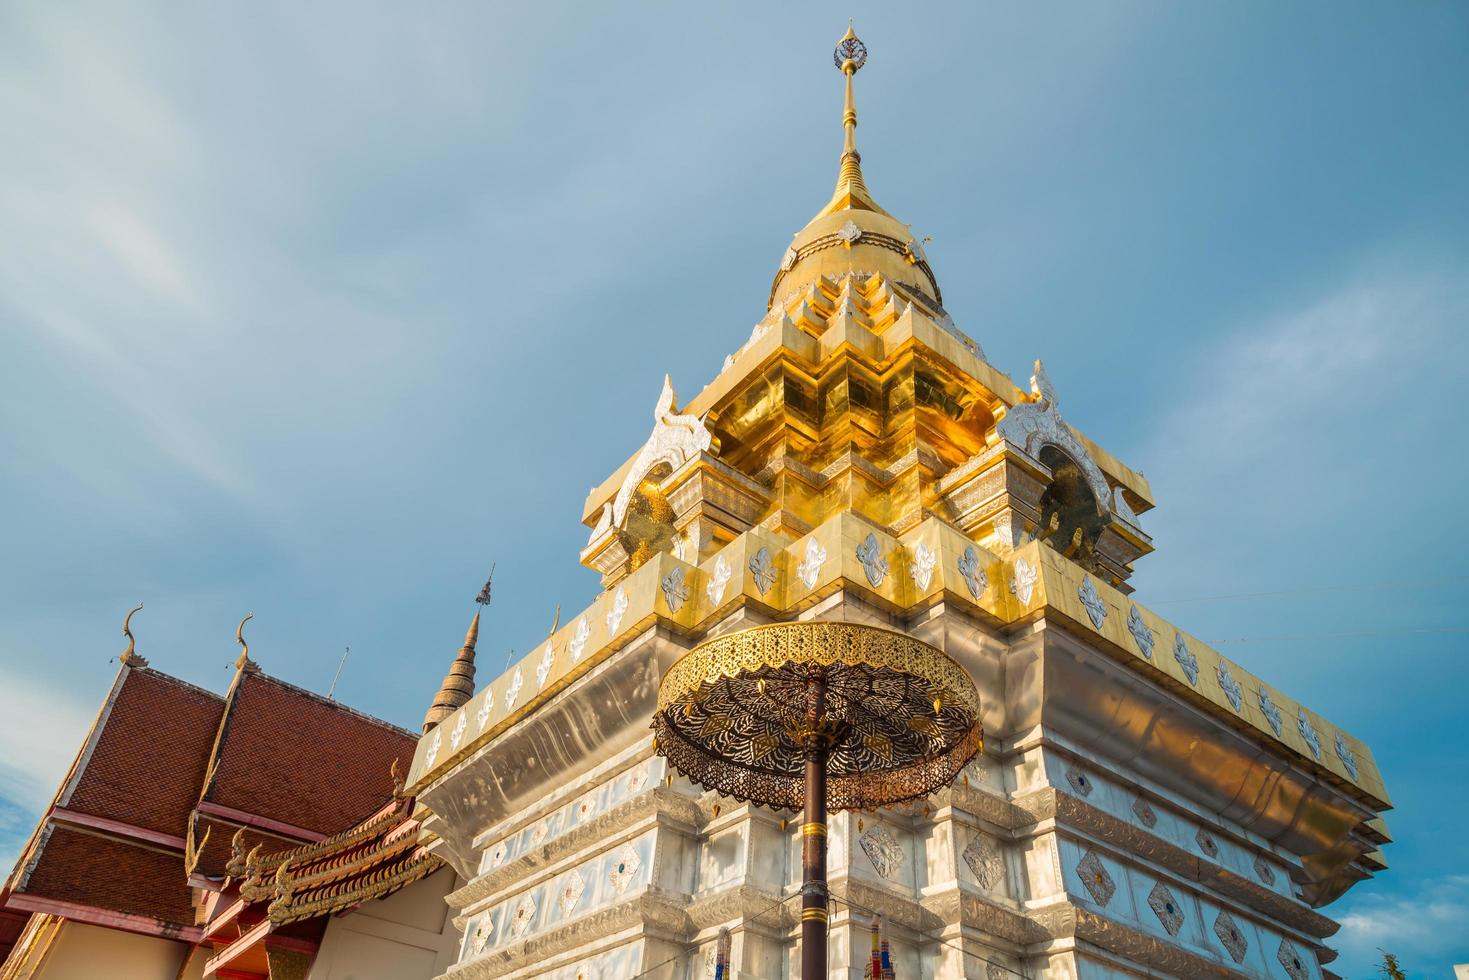 The beautiful pagoda of Wat Phra That Doi Saket located in the Doi Saket district, outside the city of Chiang Mai. photo